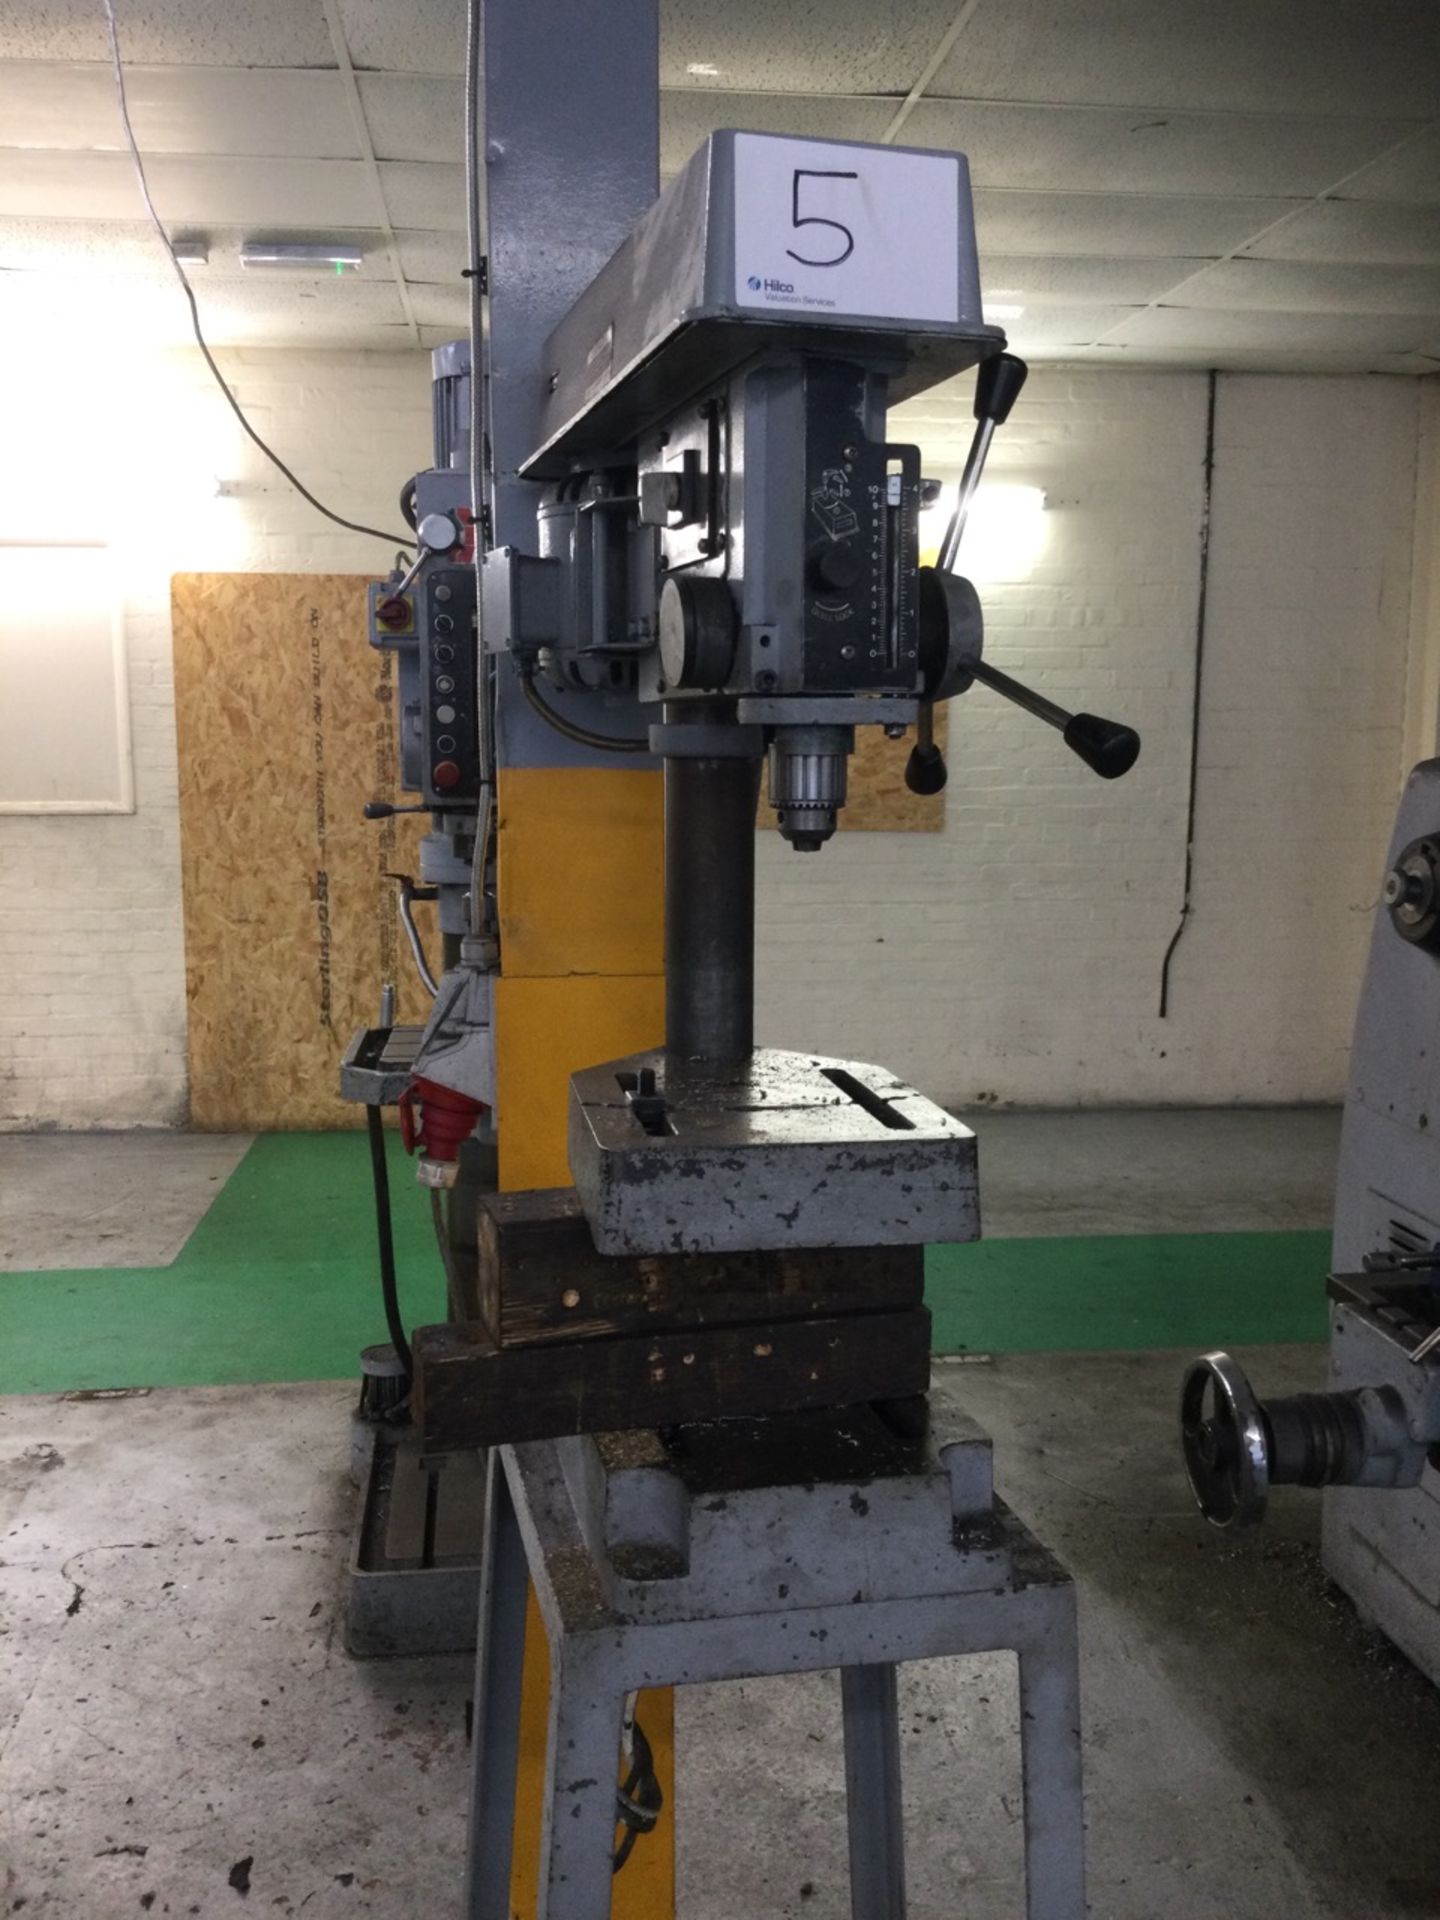 1 Meddings , DTB, Bench drill on a fabricated steel stand, Serial Number: DTB0177-7